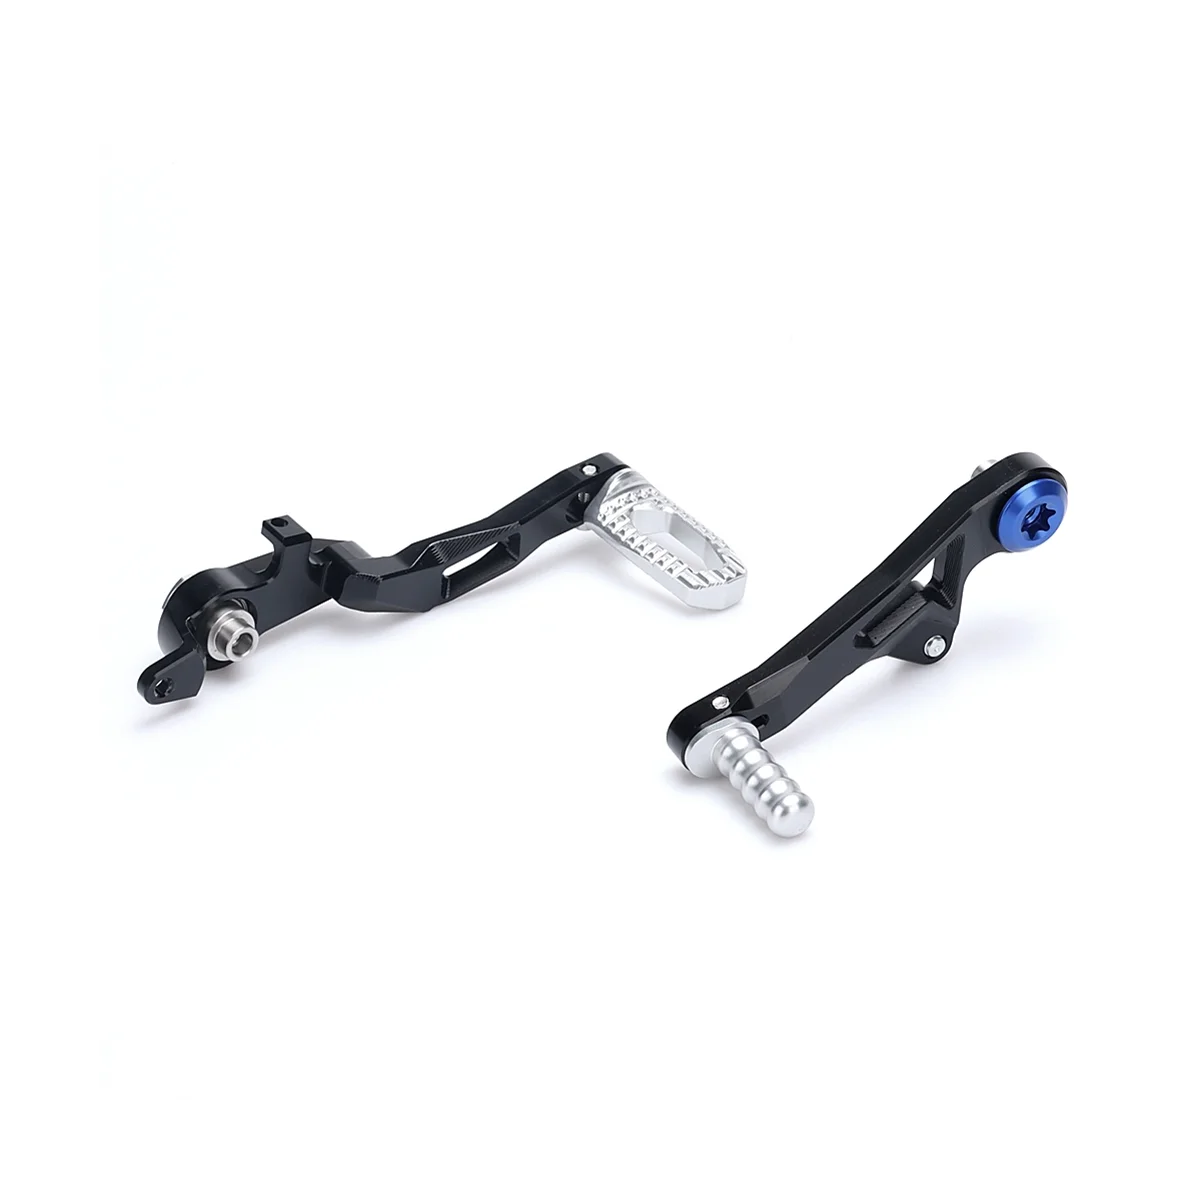 

Motorcycle Shifter Shift Brake Master Lever Foot Pedal Set for BMW R1250GS R1250 GS ADVENTURE ADV R 1250 GS HP(Black)